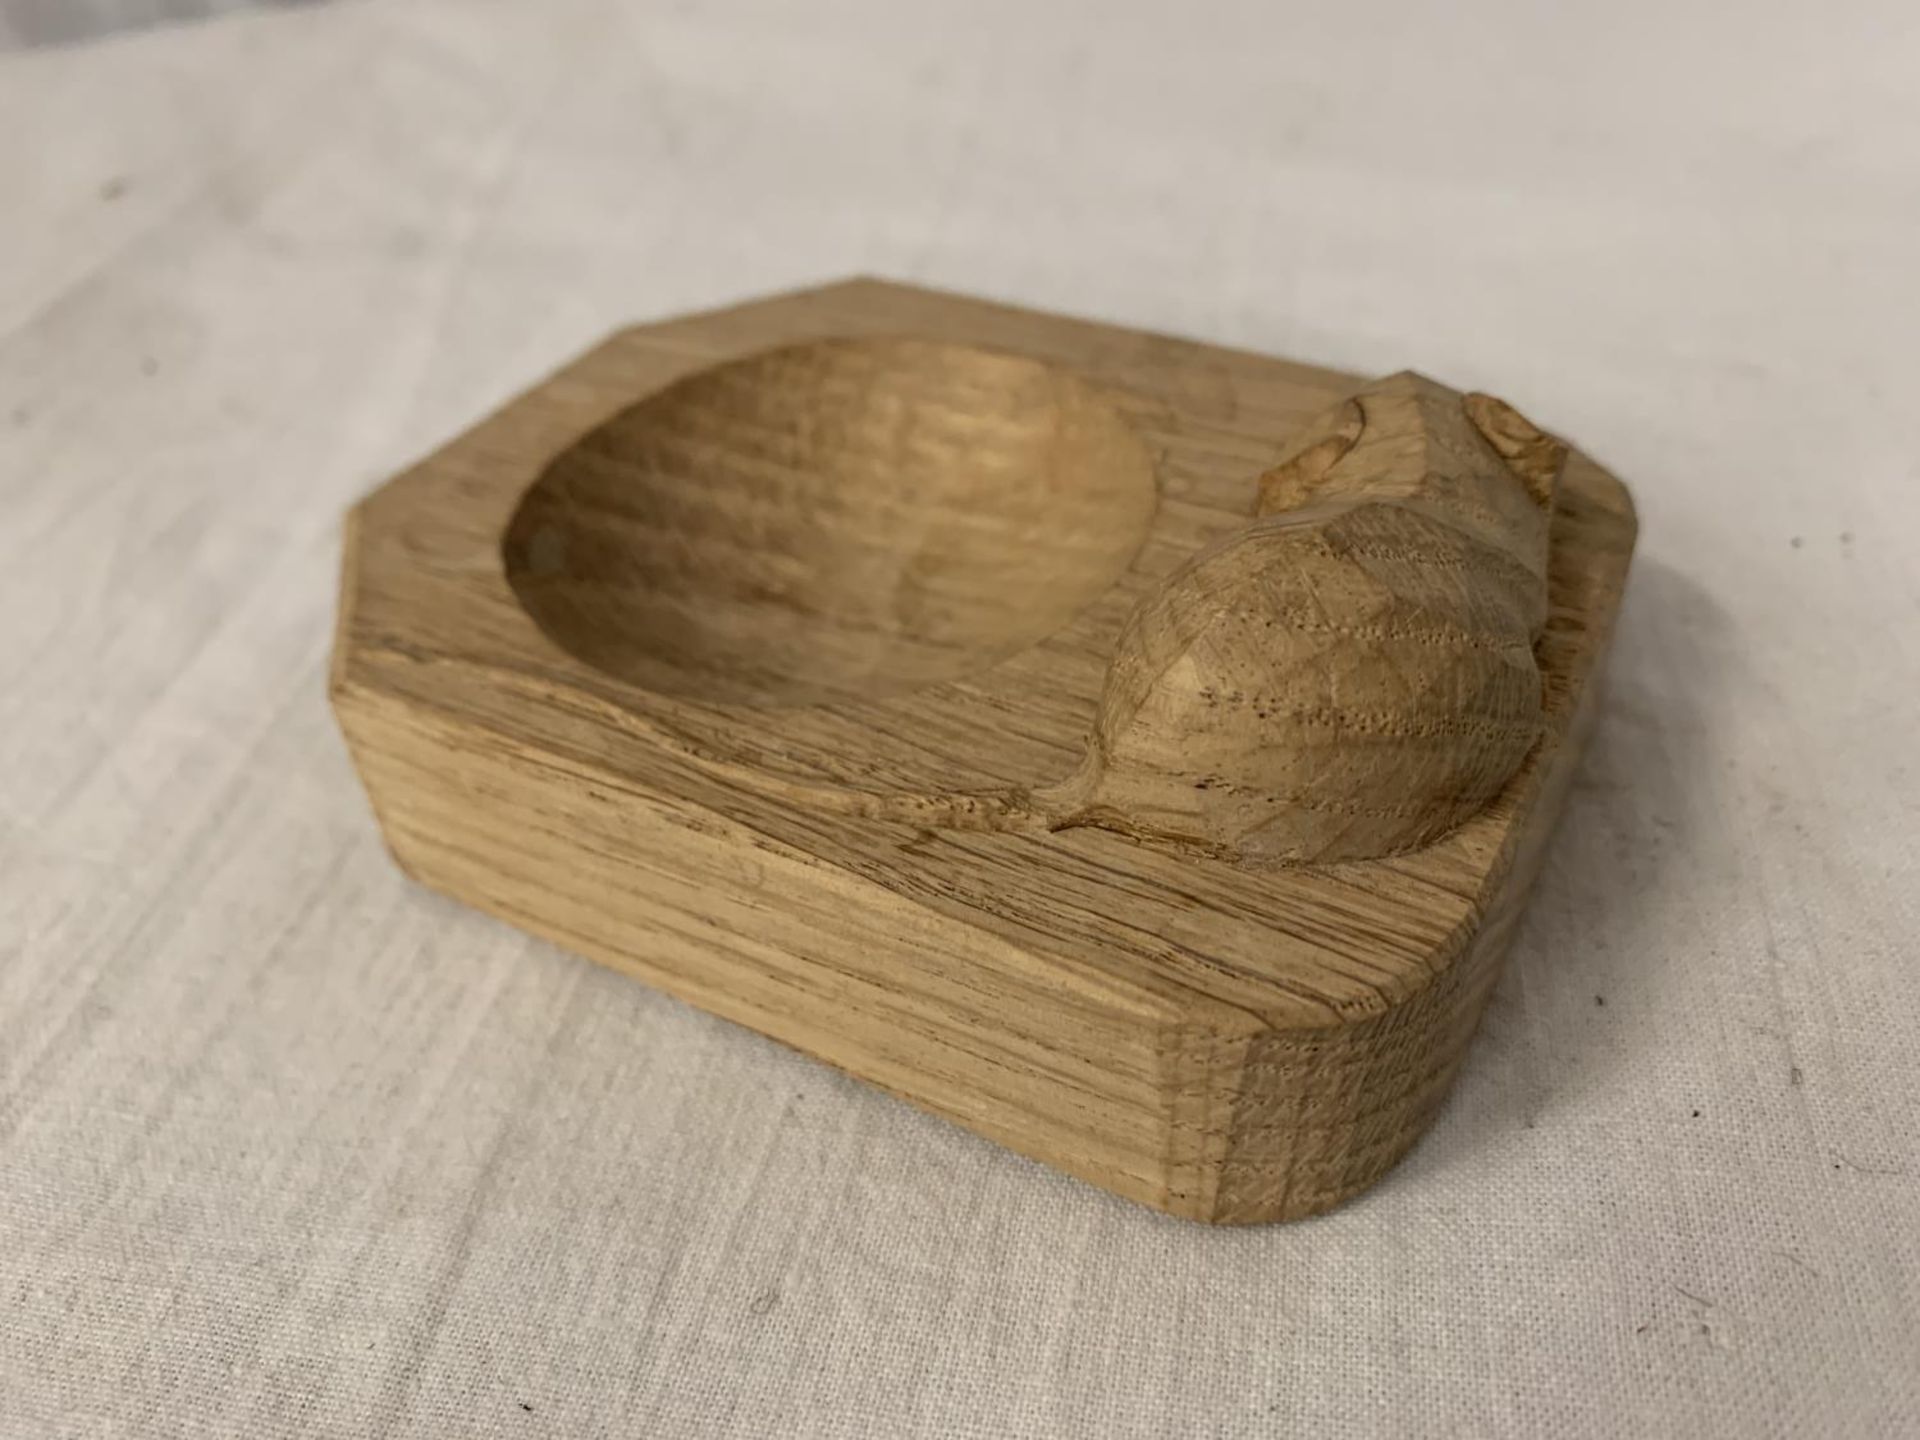 A ROBERT THOMPSON "MOUSEMAN" CARVED OAK TRINKET/ ASH TRAY WITH MOUSE INSIGNIA - Image 3 of 4